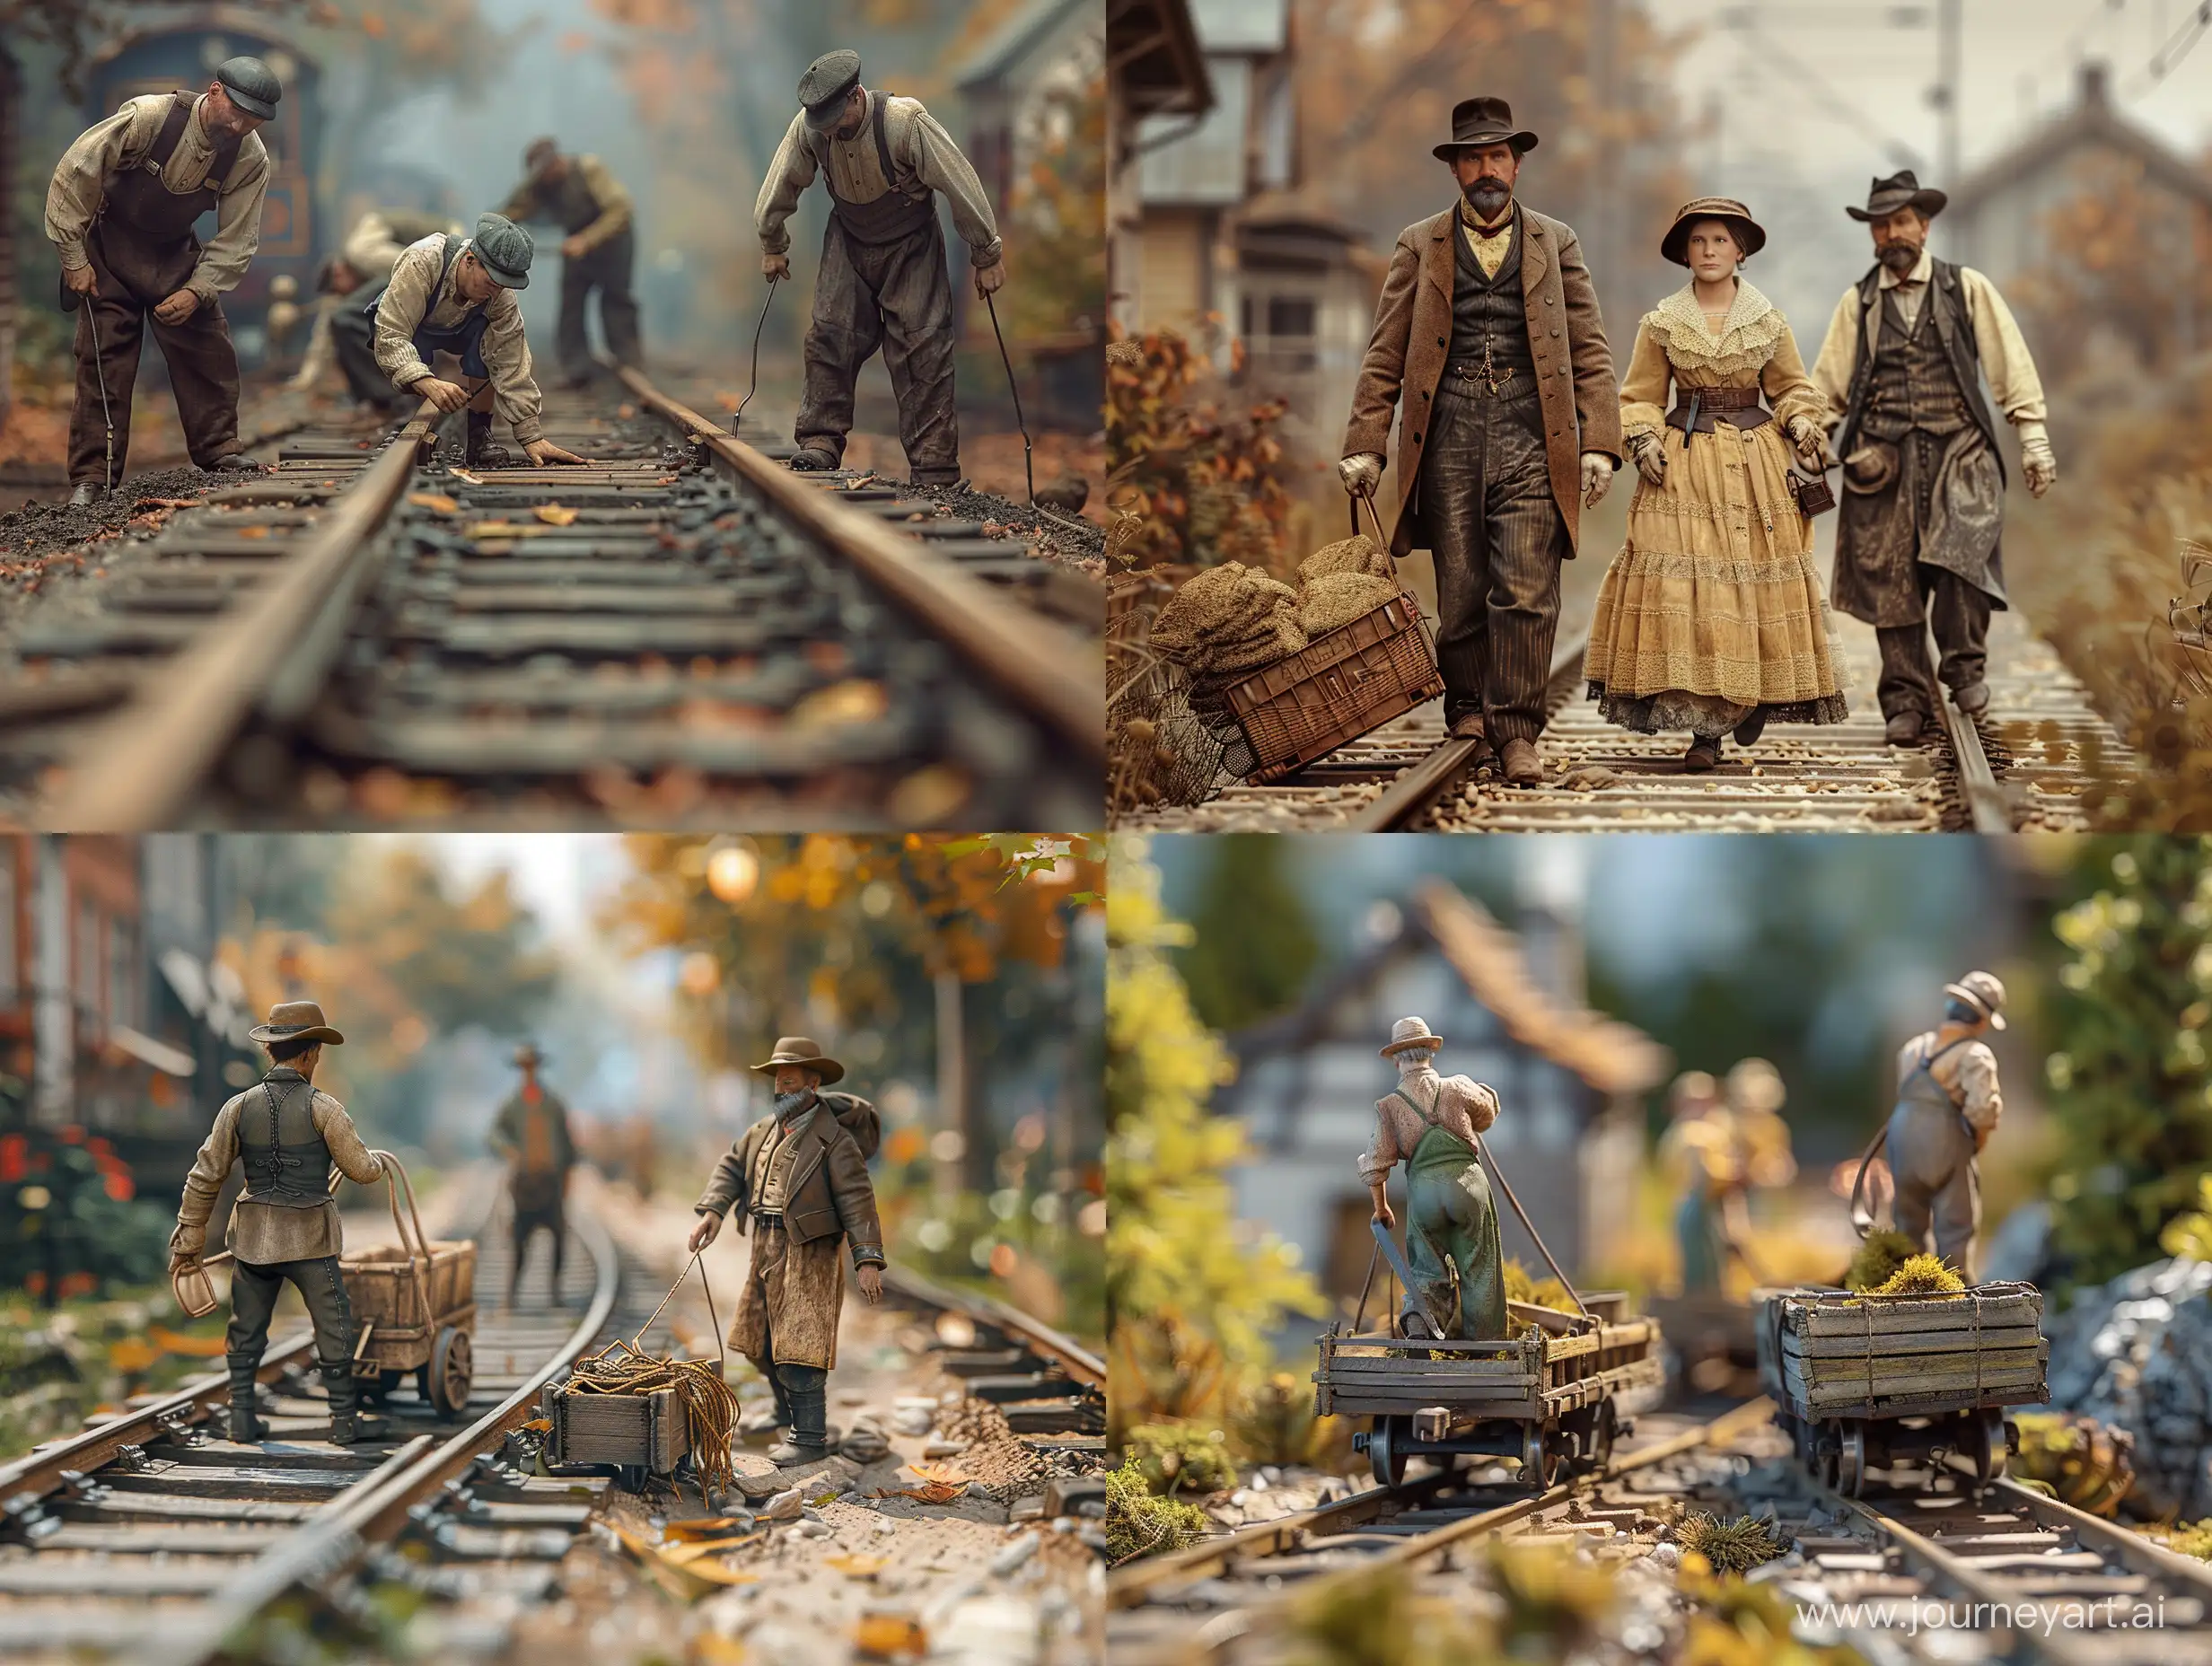 Historical-Railway-Workers-at-Work-in-1850-Realistic-Daily-Scenes-with-Professional-Detailing